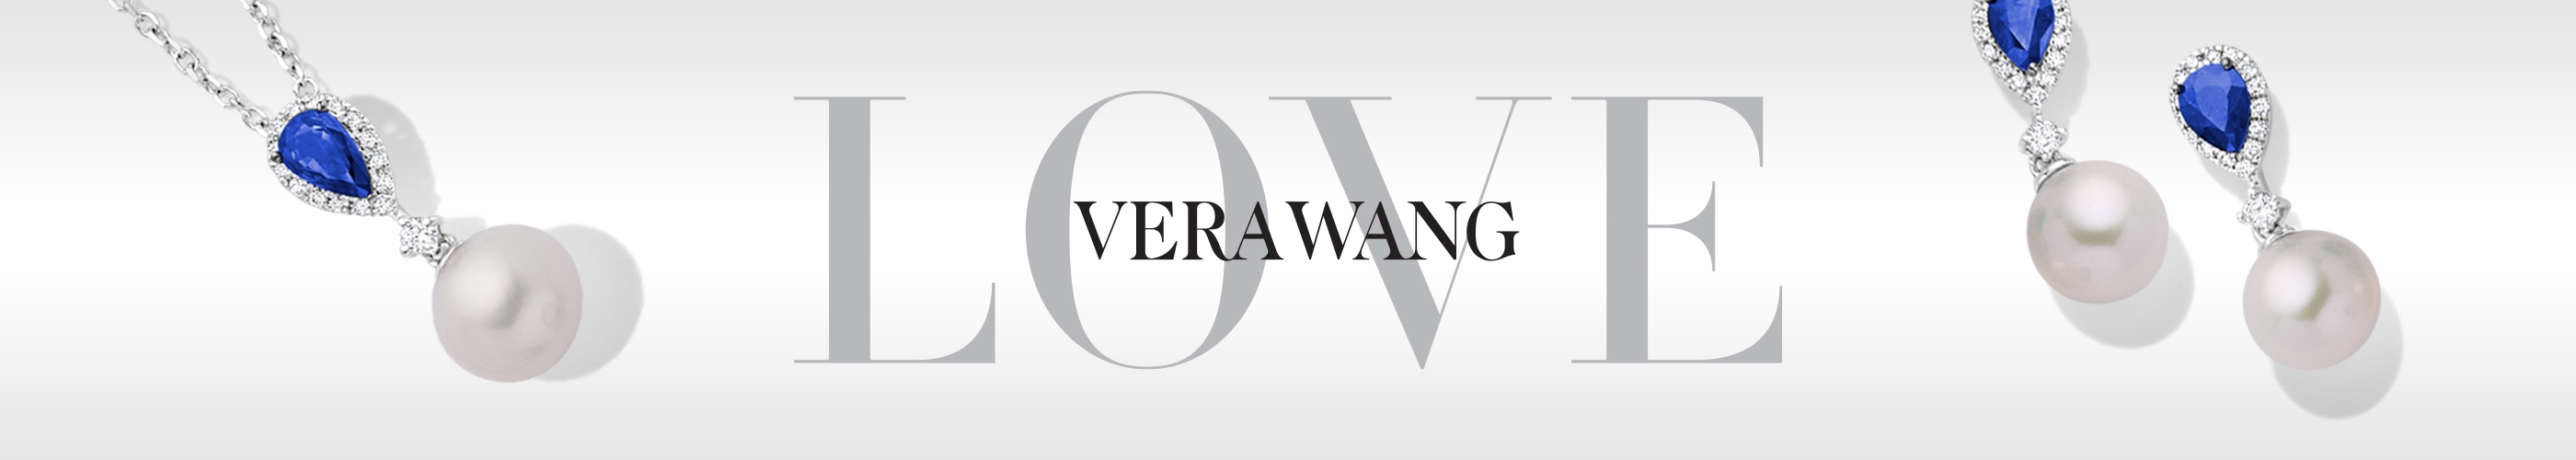 Vera Wang Fashion - Exclusive pendants, earrings, fashion rings and bracelets in stunning designs reflective of Vera Wang's unprecedented style.									 									